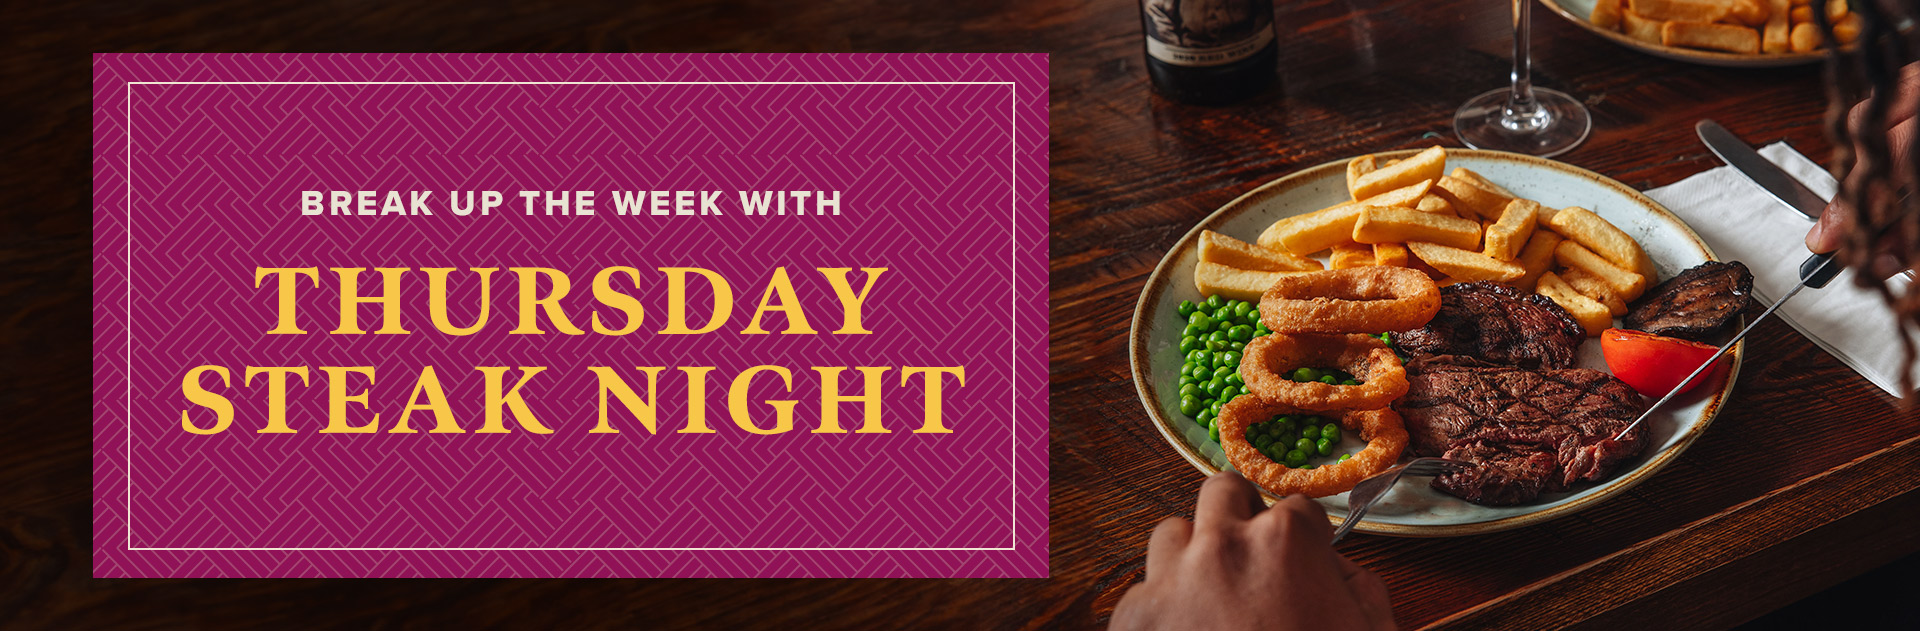 Thursday Steak Night at The Rayleigh Lodge